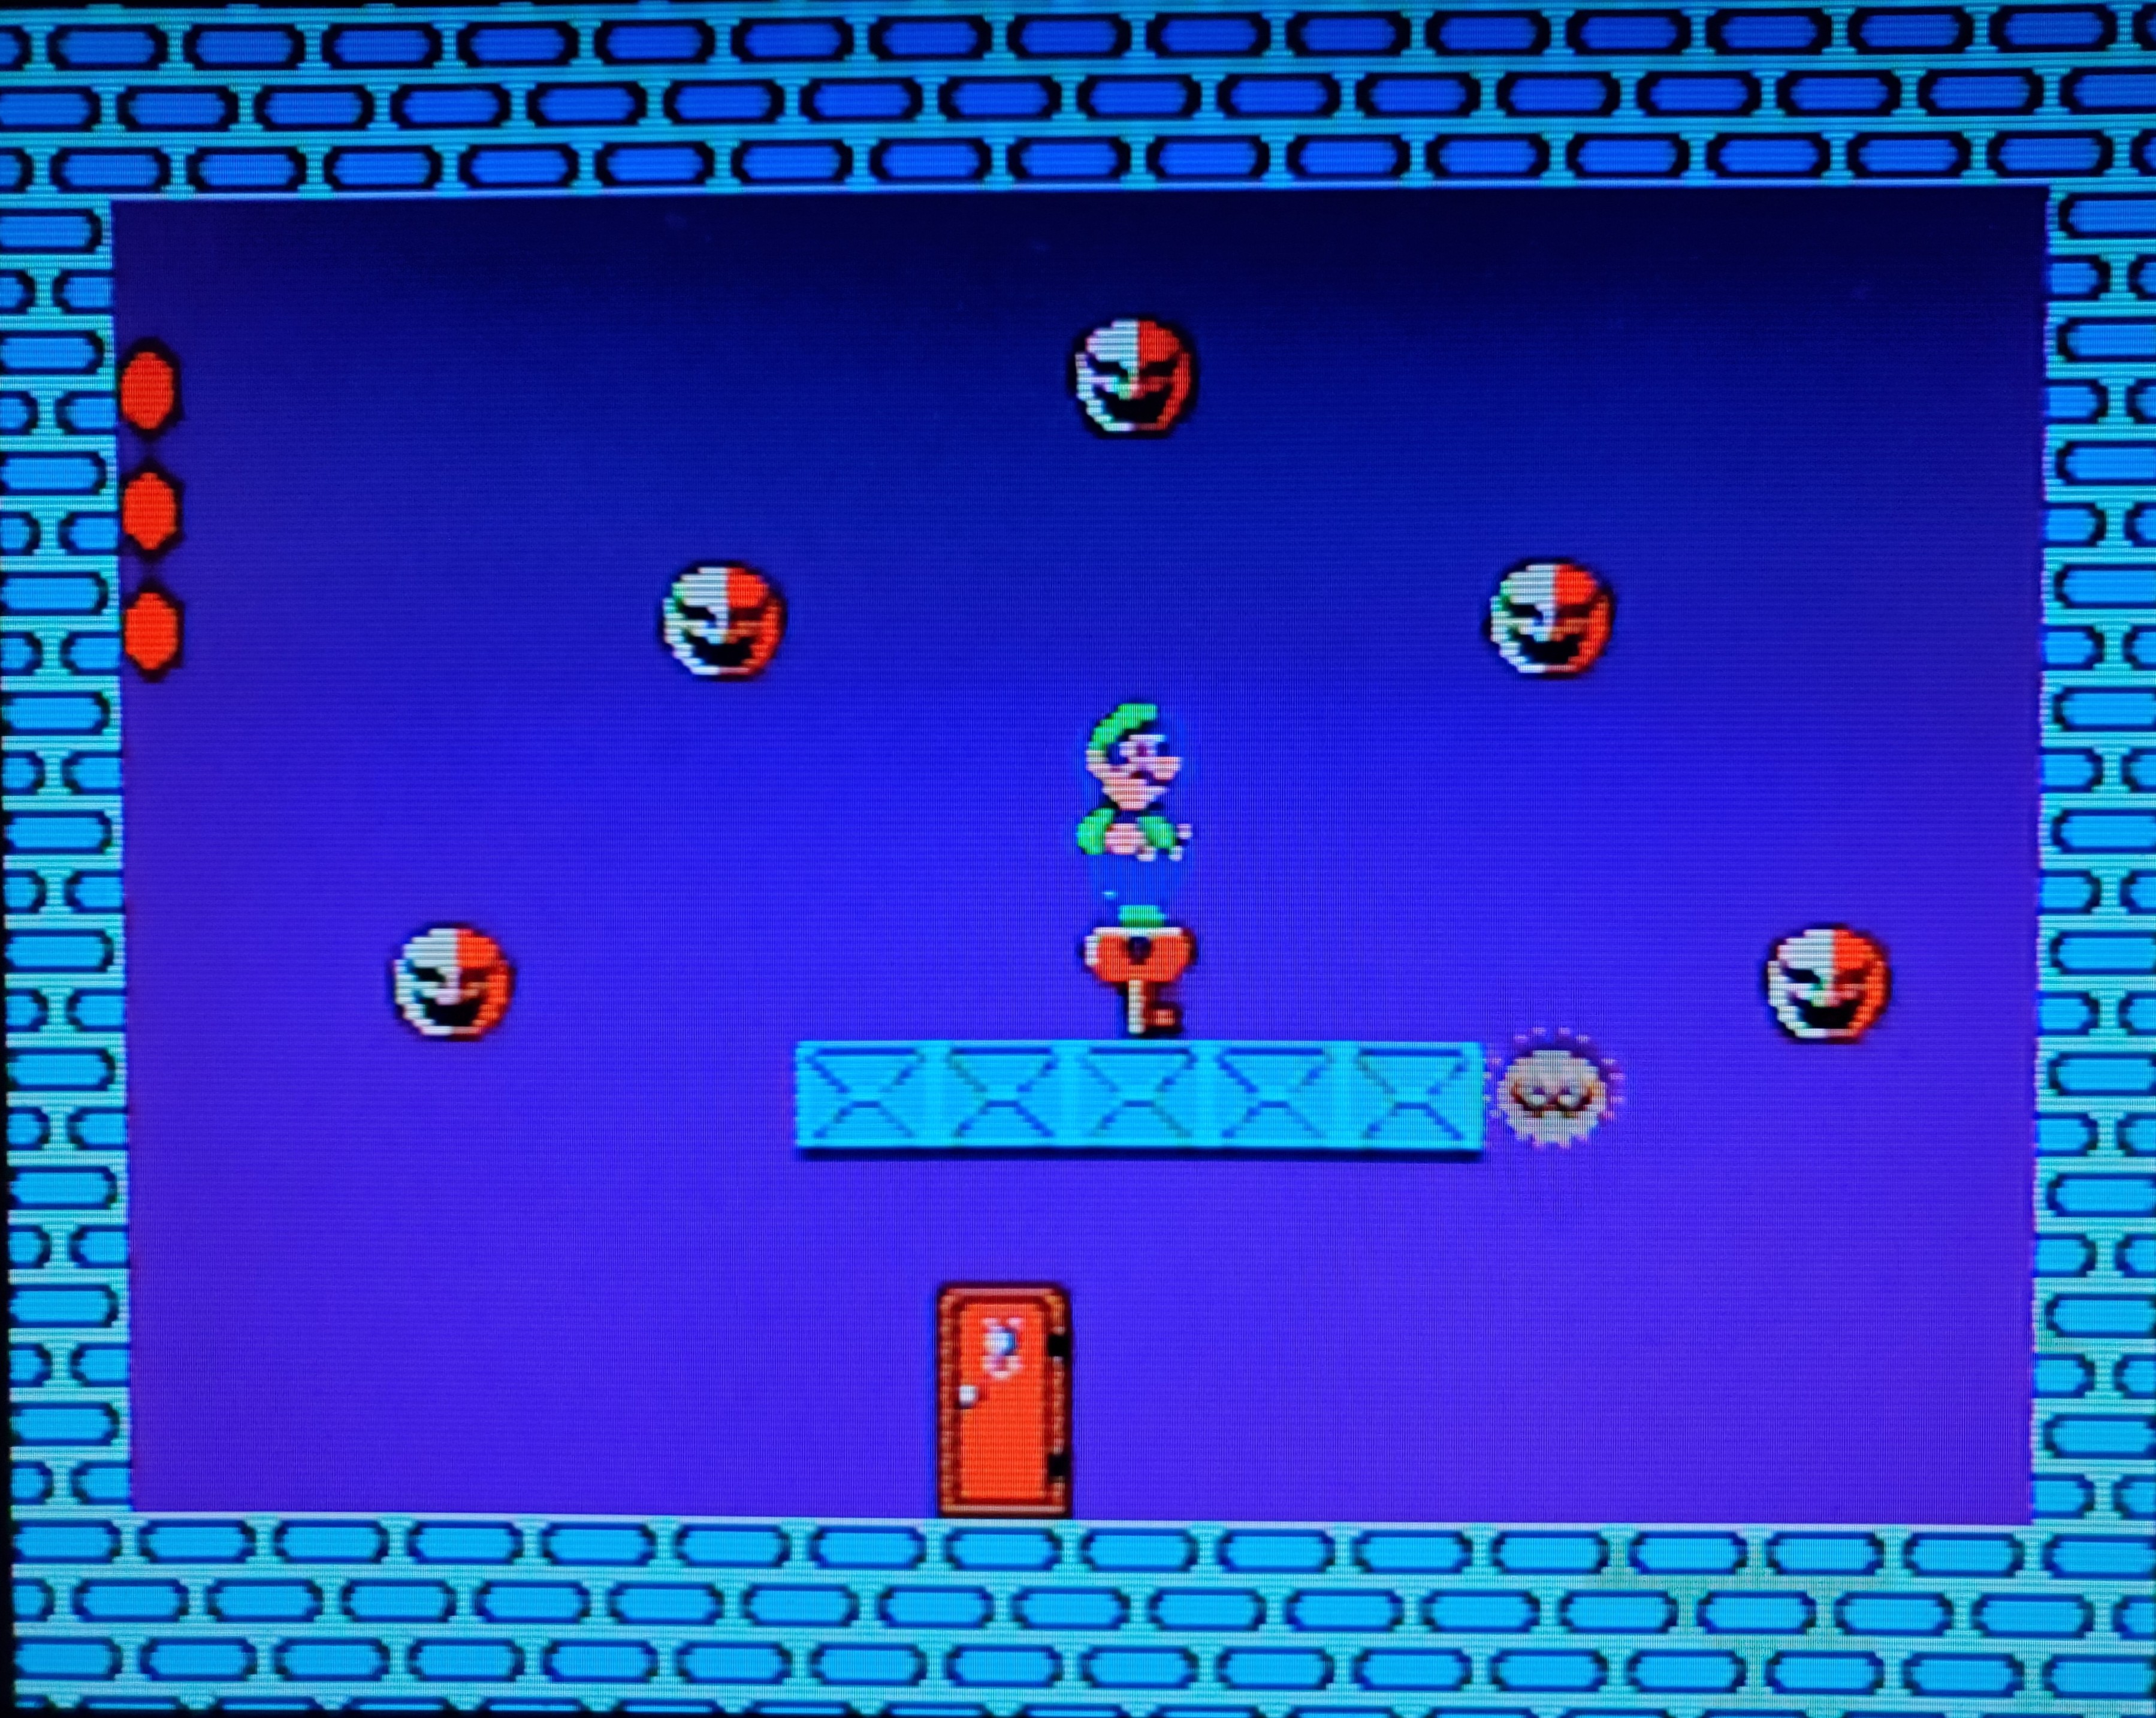 Mario Wonder's final level pushed my patience to the limit - The Verge